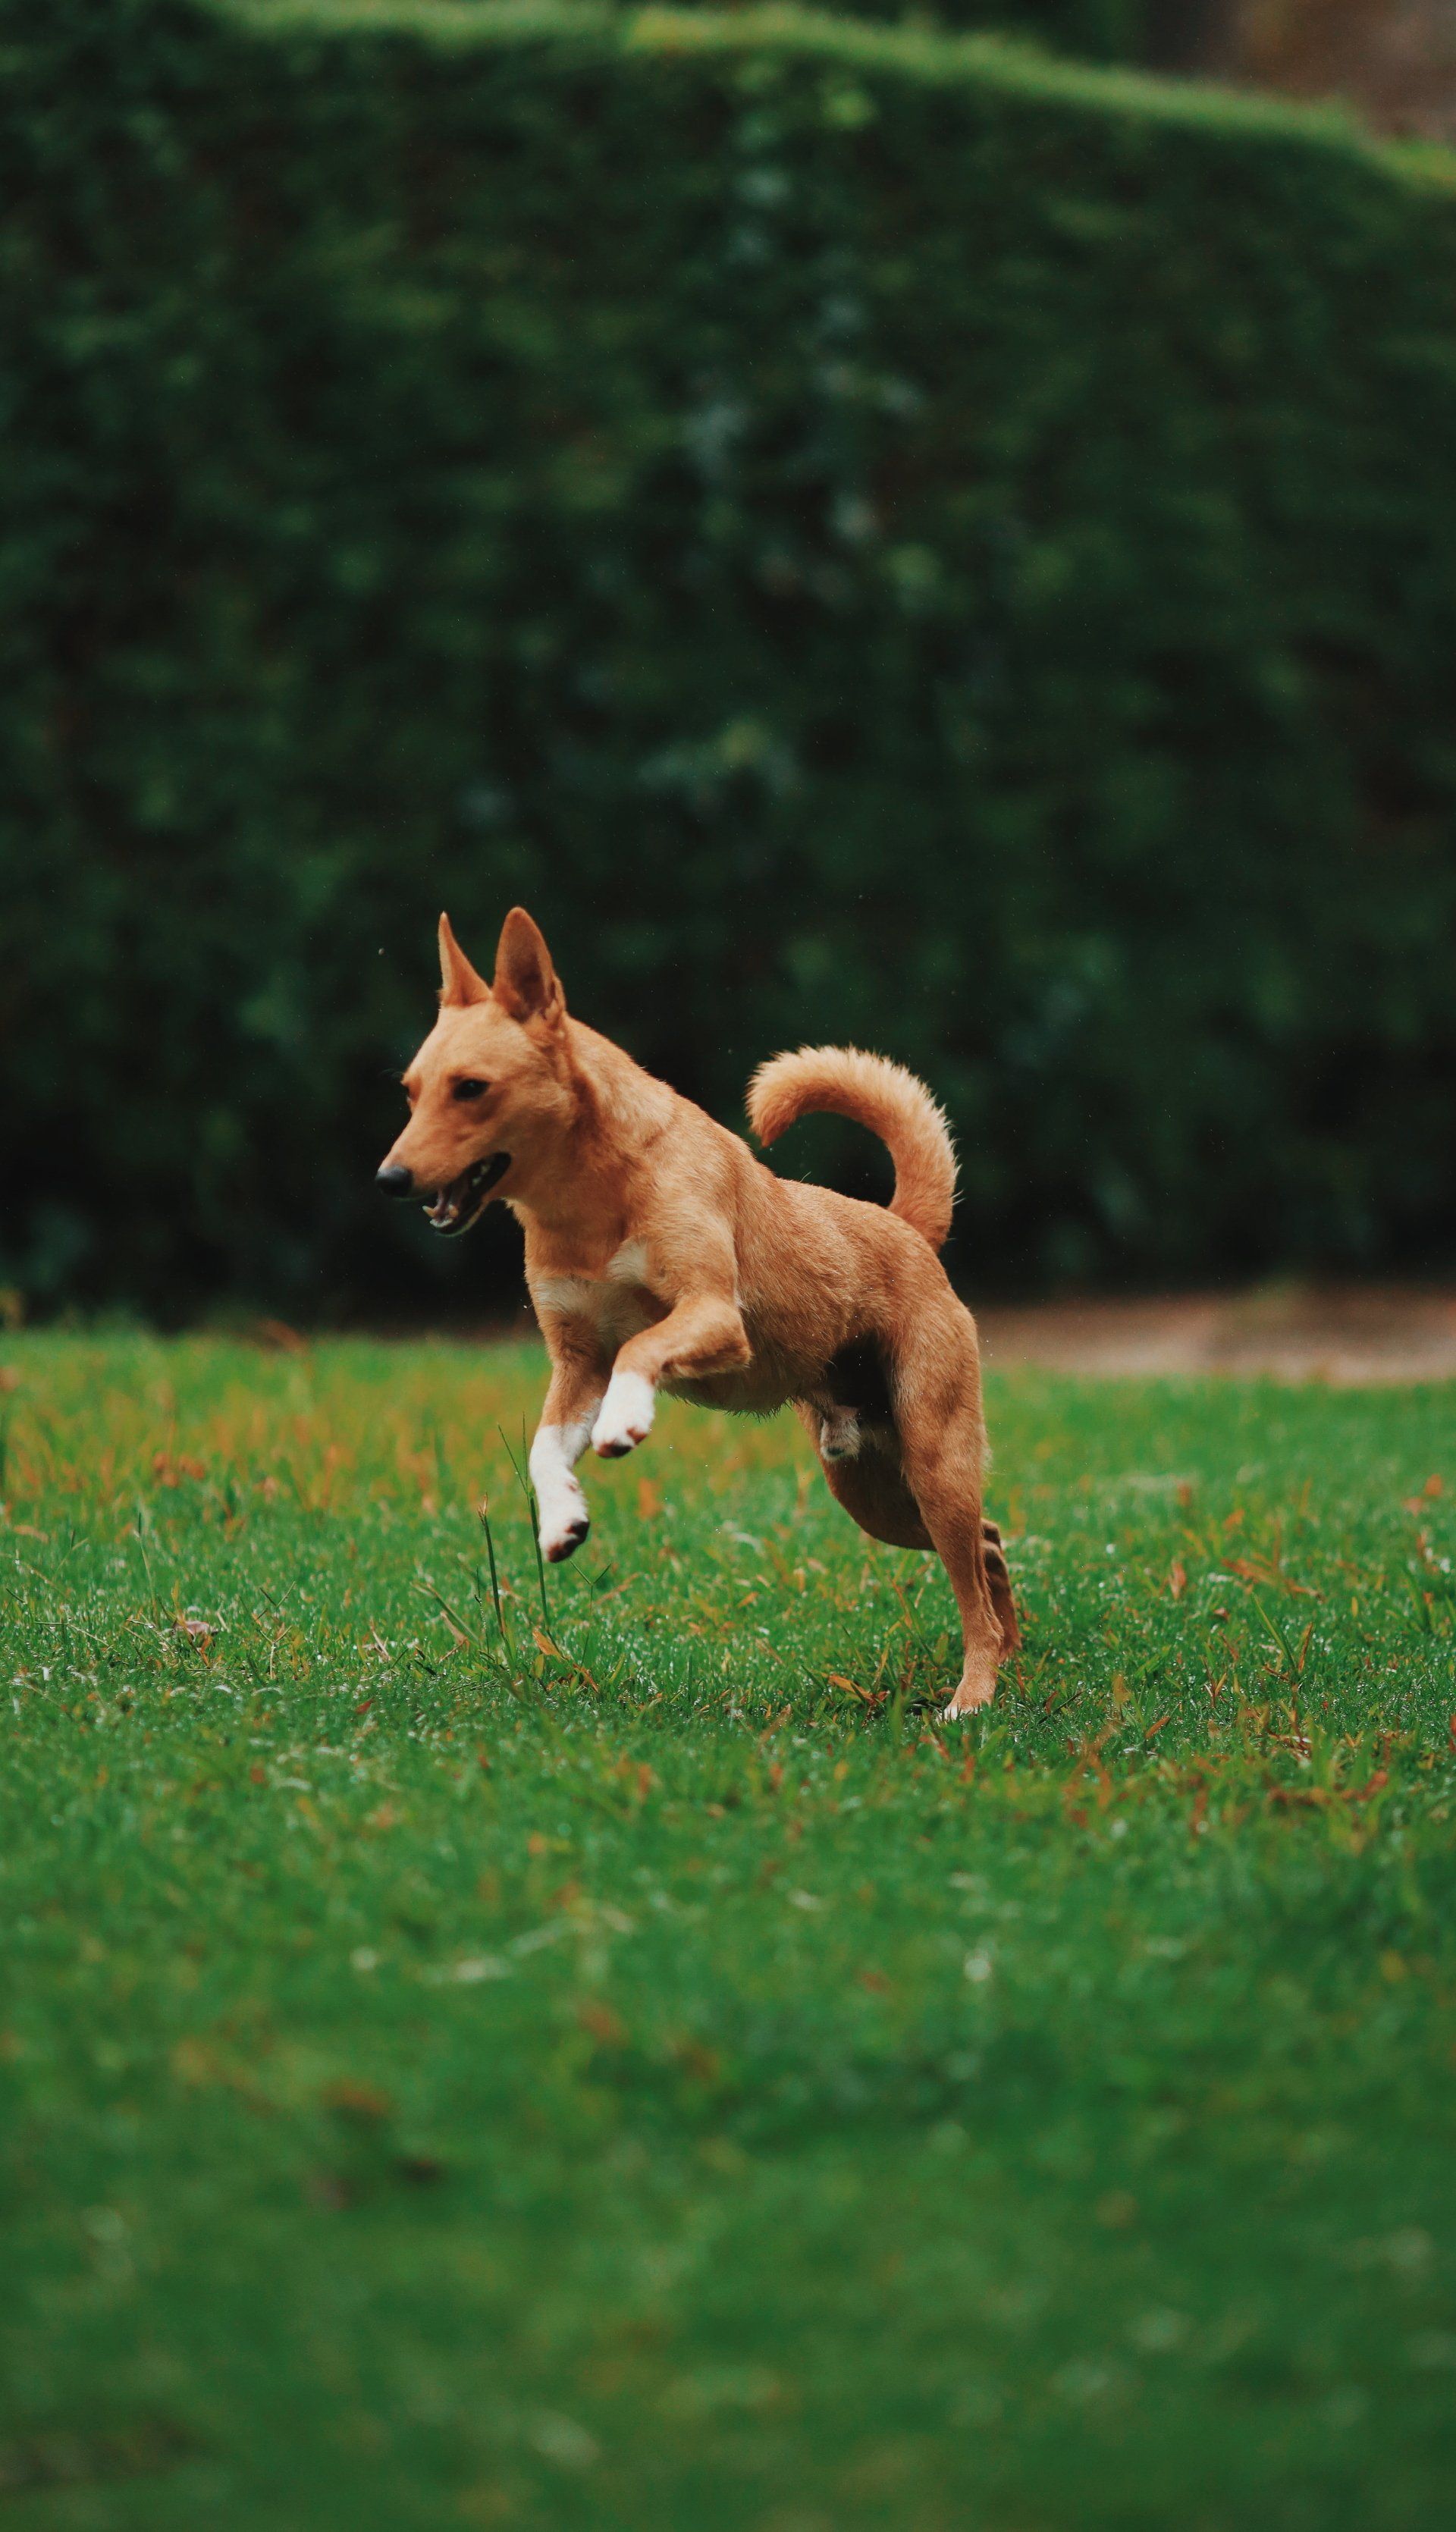 A dog is running in the grass in a park.